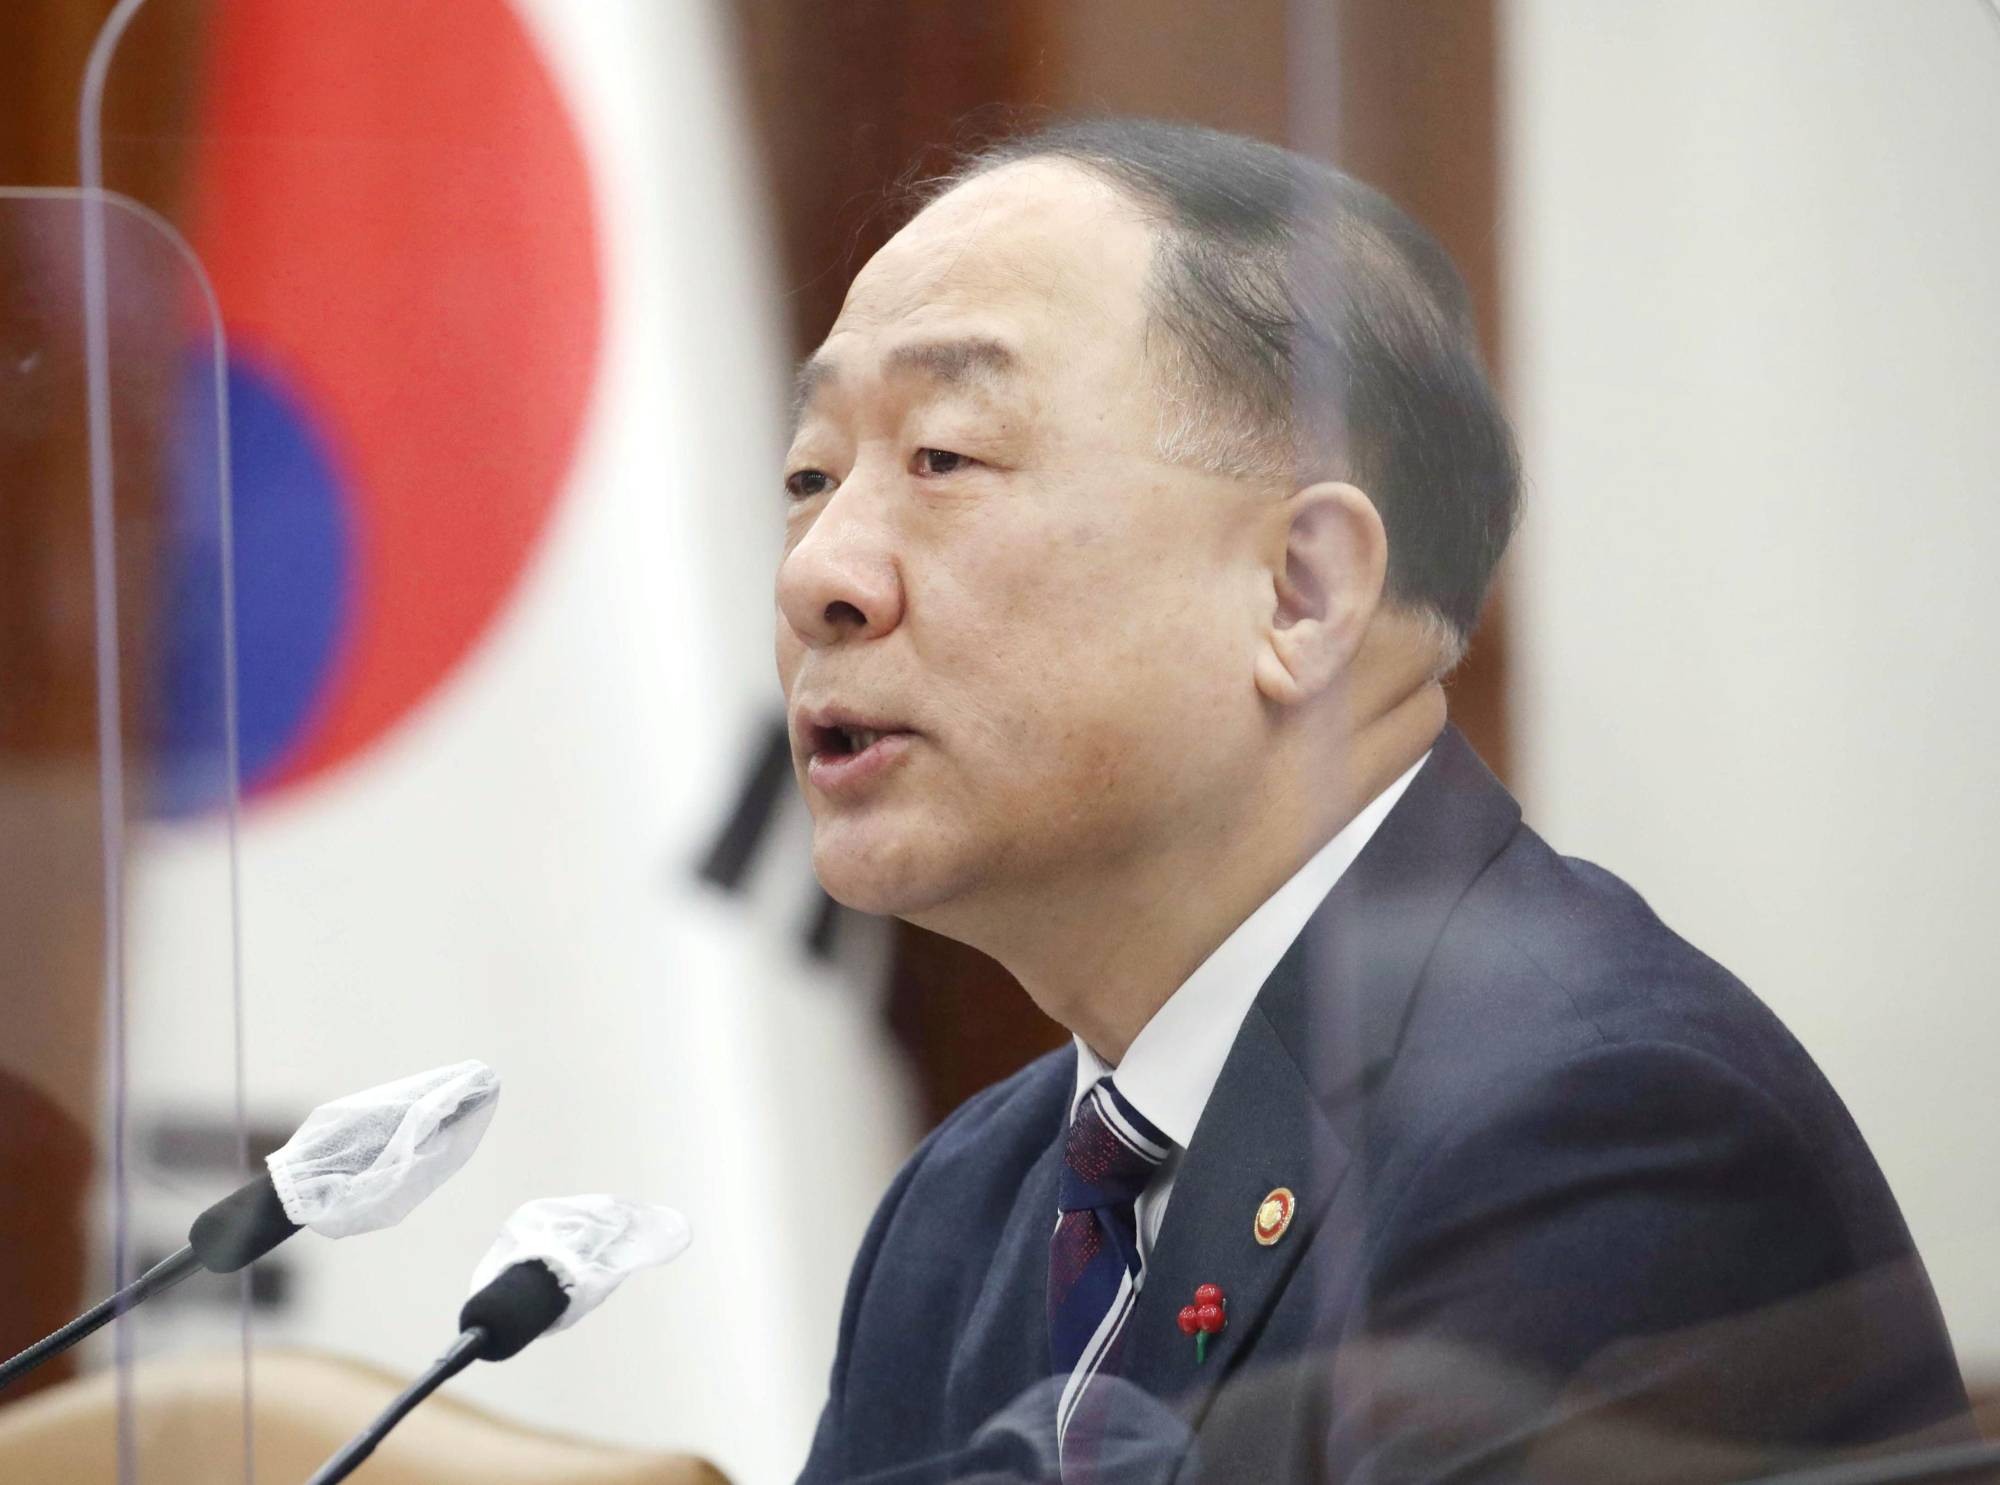 South Korean Finance Minister Hong Nam-ki has said the country's government will begin the process to join the CPTPP free trade deal, adding it to a growing list of applicants that includes China and Taiwan. | YONHAP / VIA KYODO